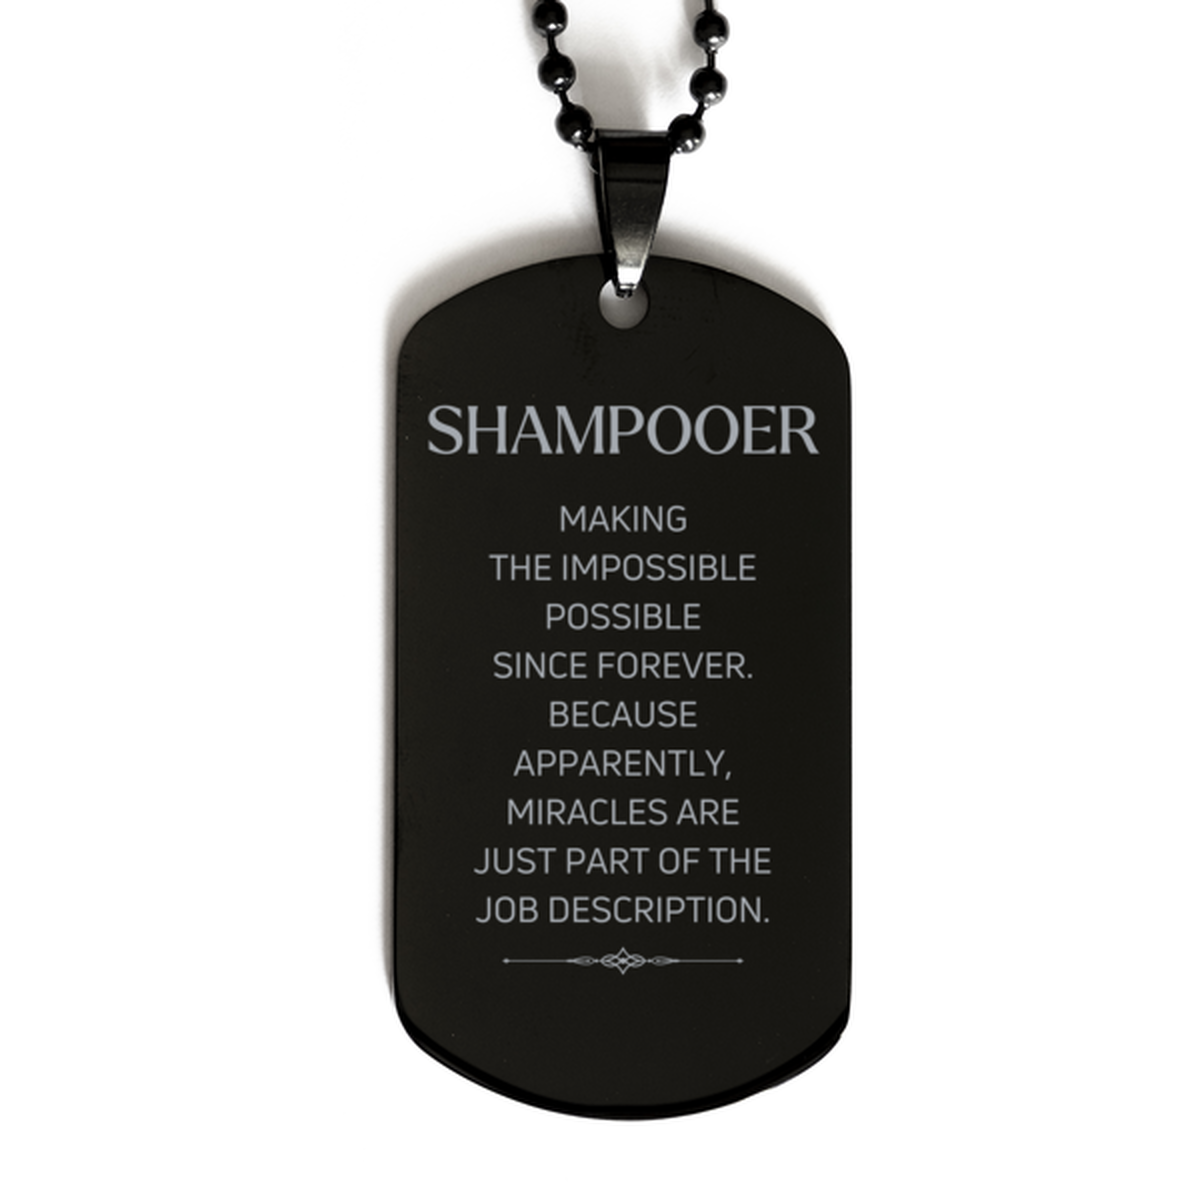 Funny Shampooer Gifts, Miracles are just part of the job description, Inspirational Birthday Black Dog Tag For Shampooer, Men, Women, Coworkers, Friends, Boss